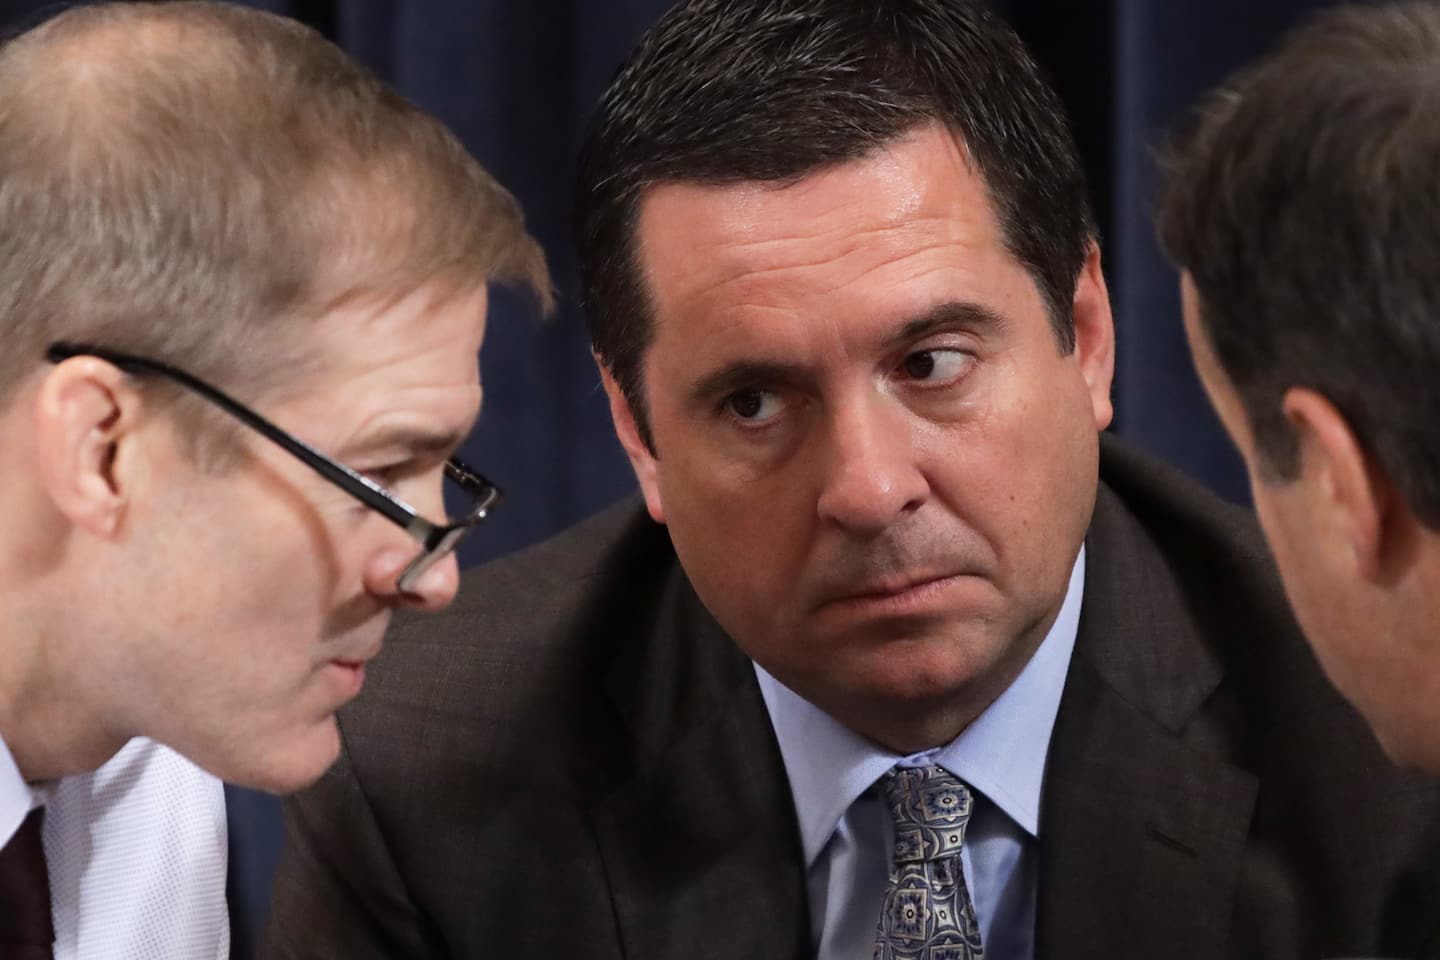 President Trump is expected to give ally Rep. Devin Nunes the Presidential Medal of Freedom -